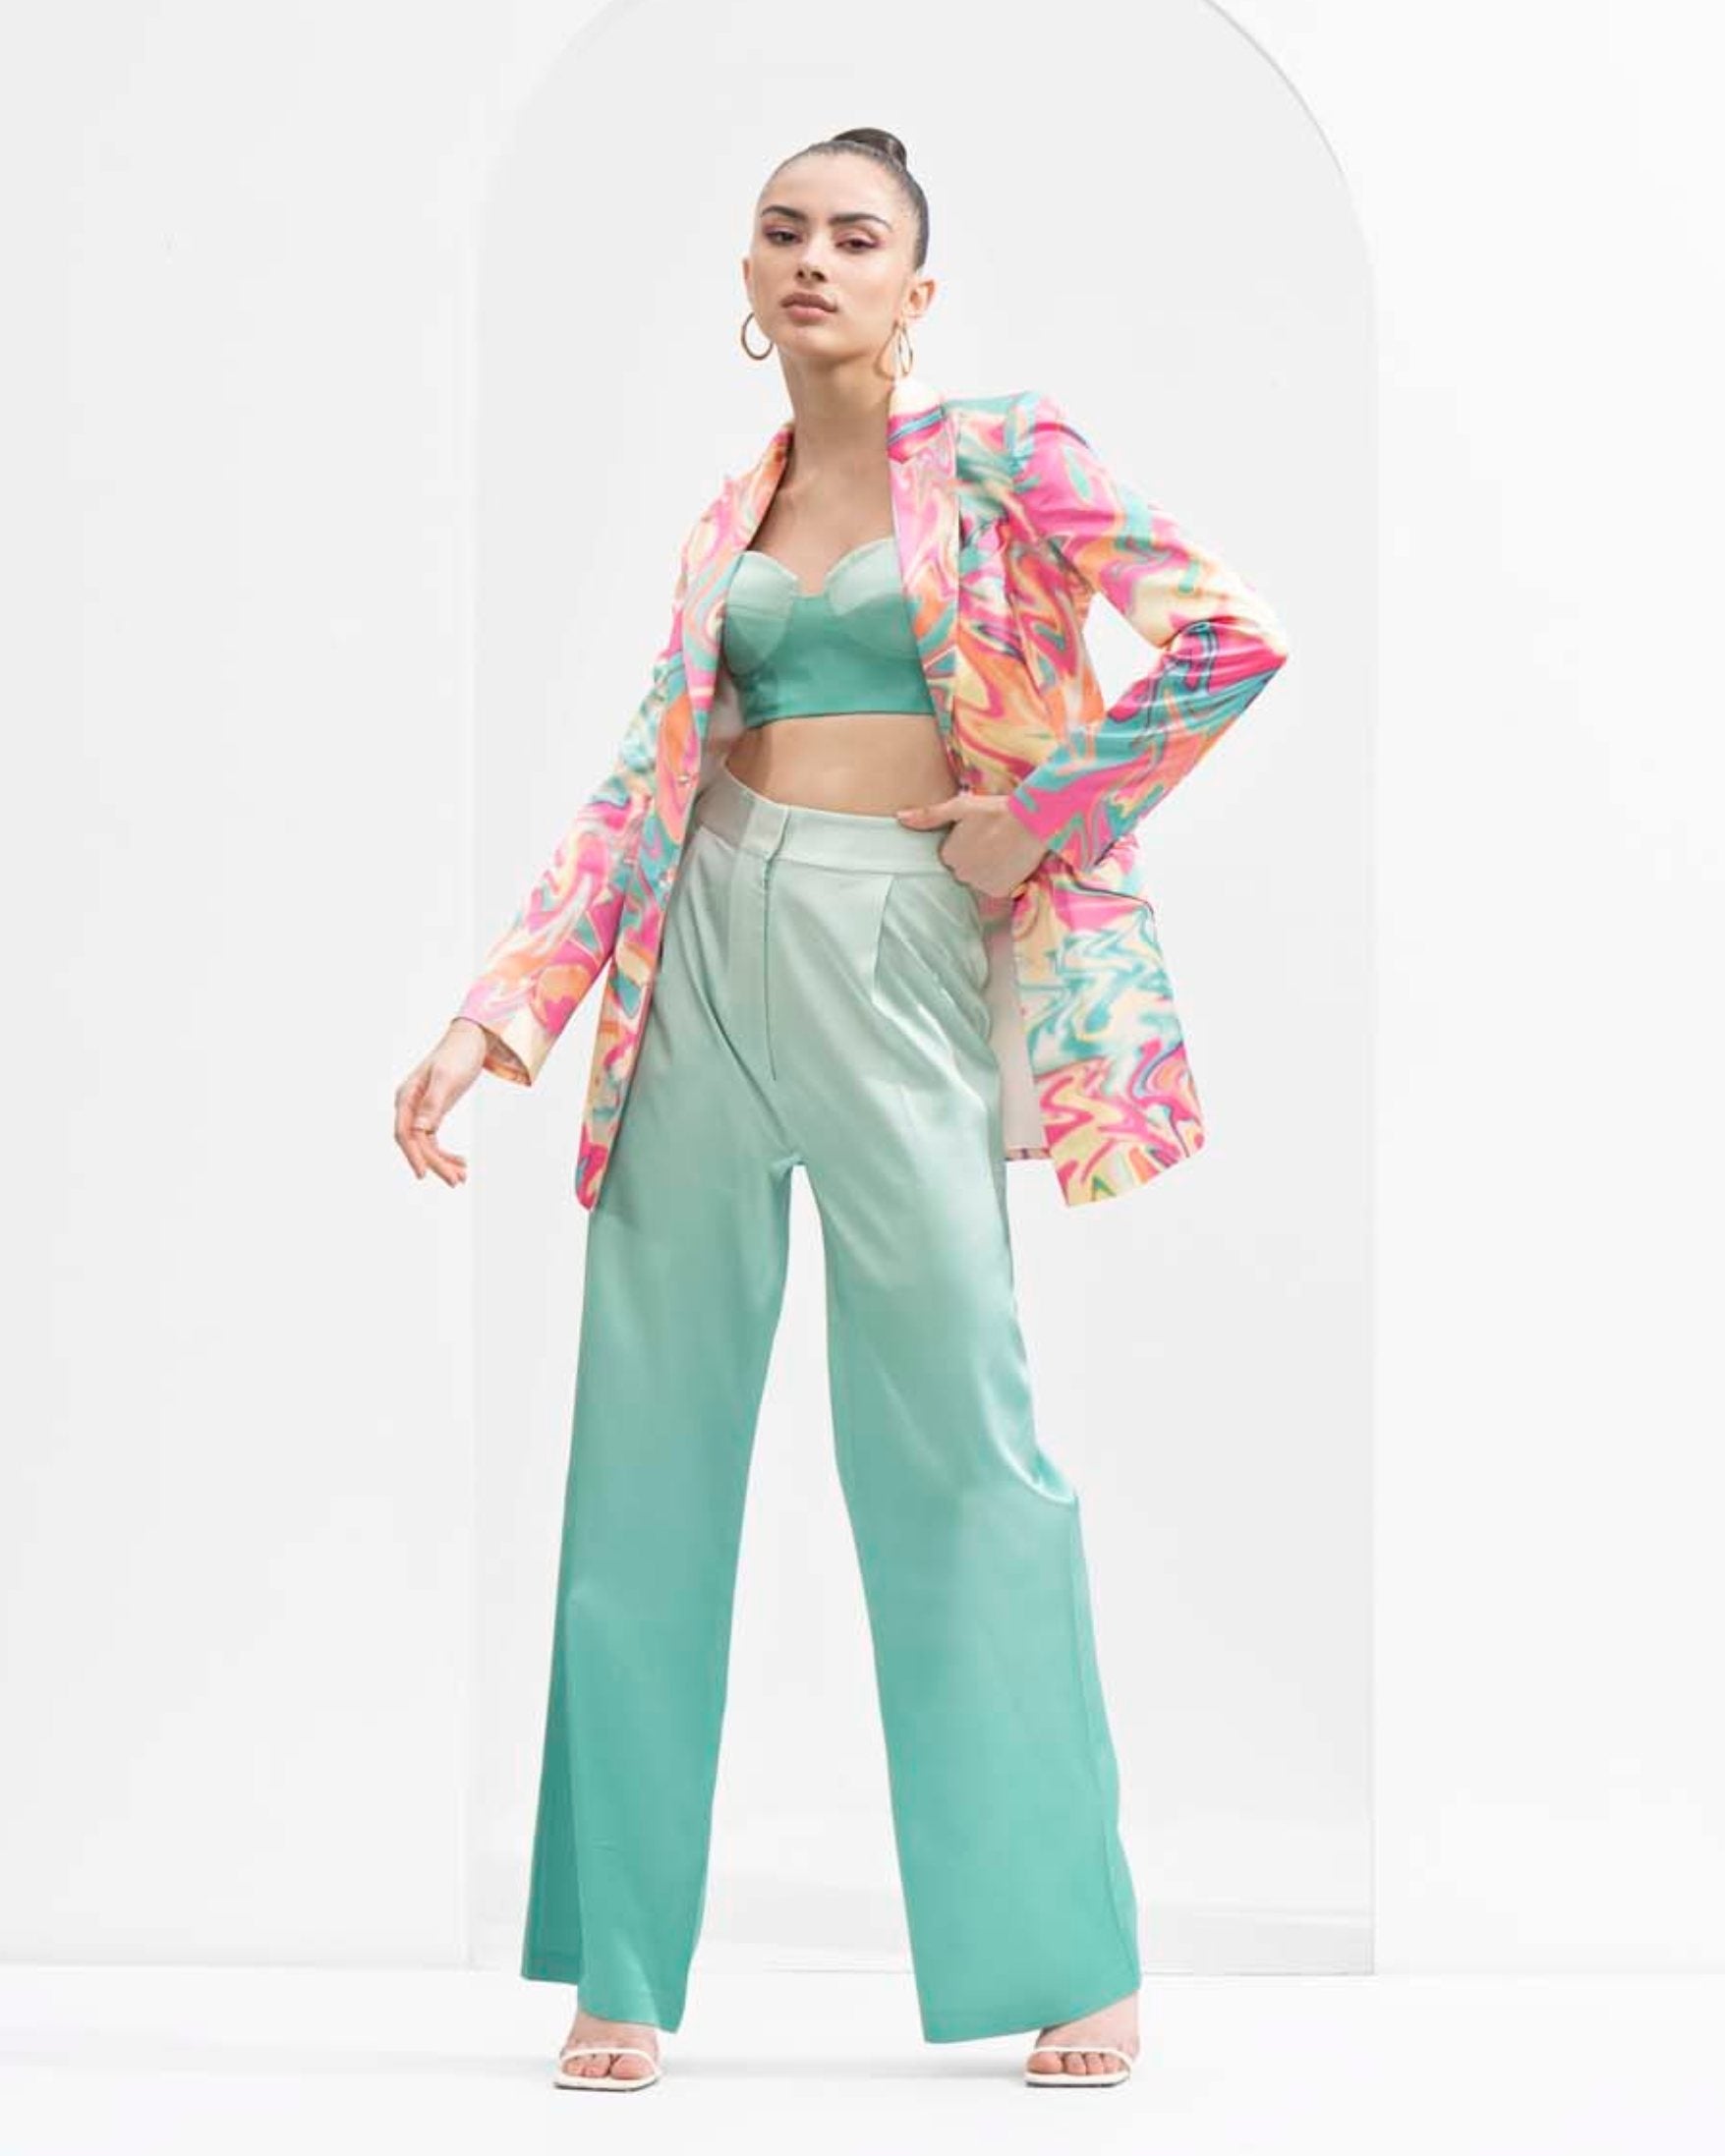 Blurred printed satin jacket, ombre printed corset bustier, and pants. #RTS